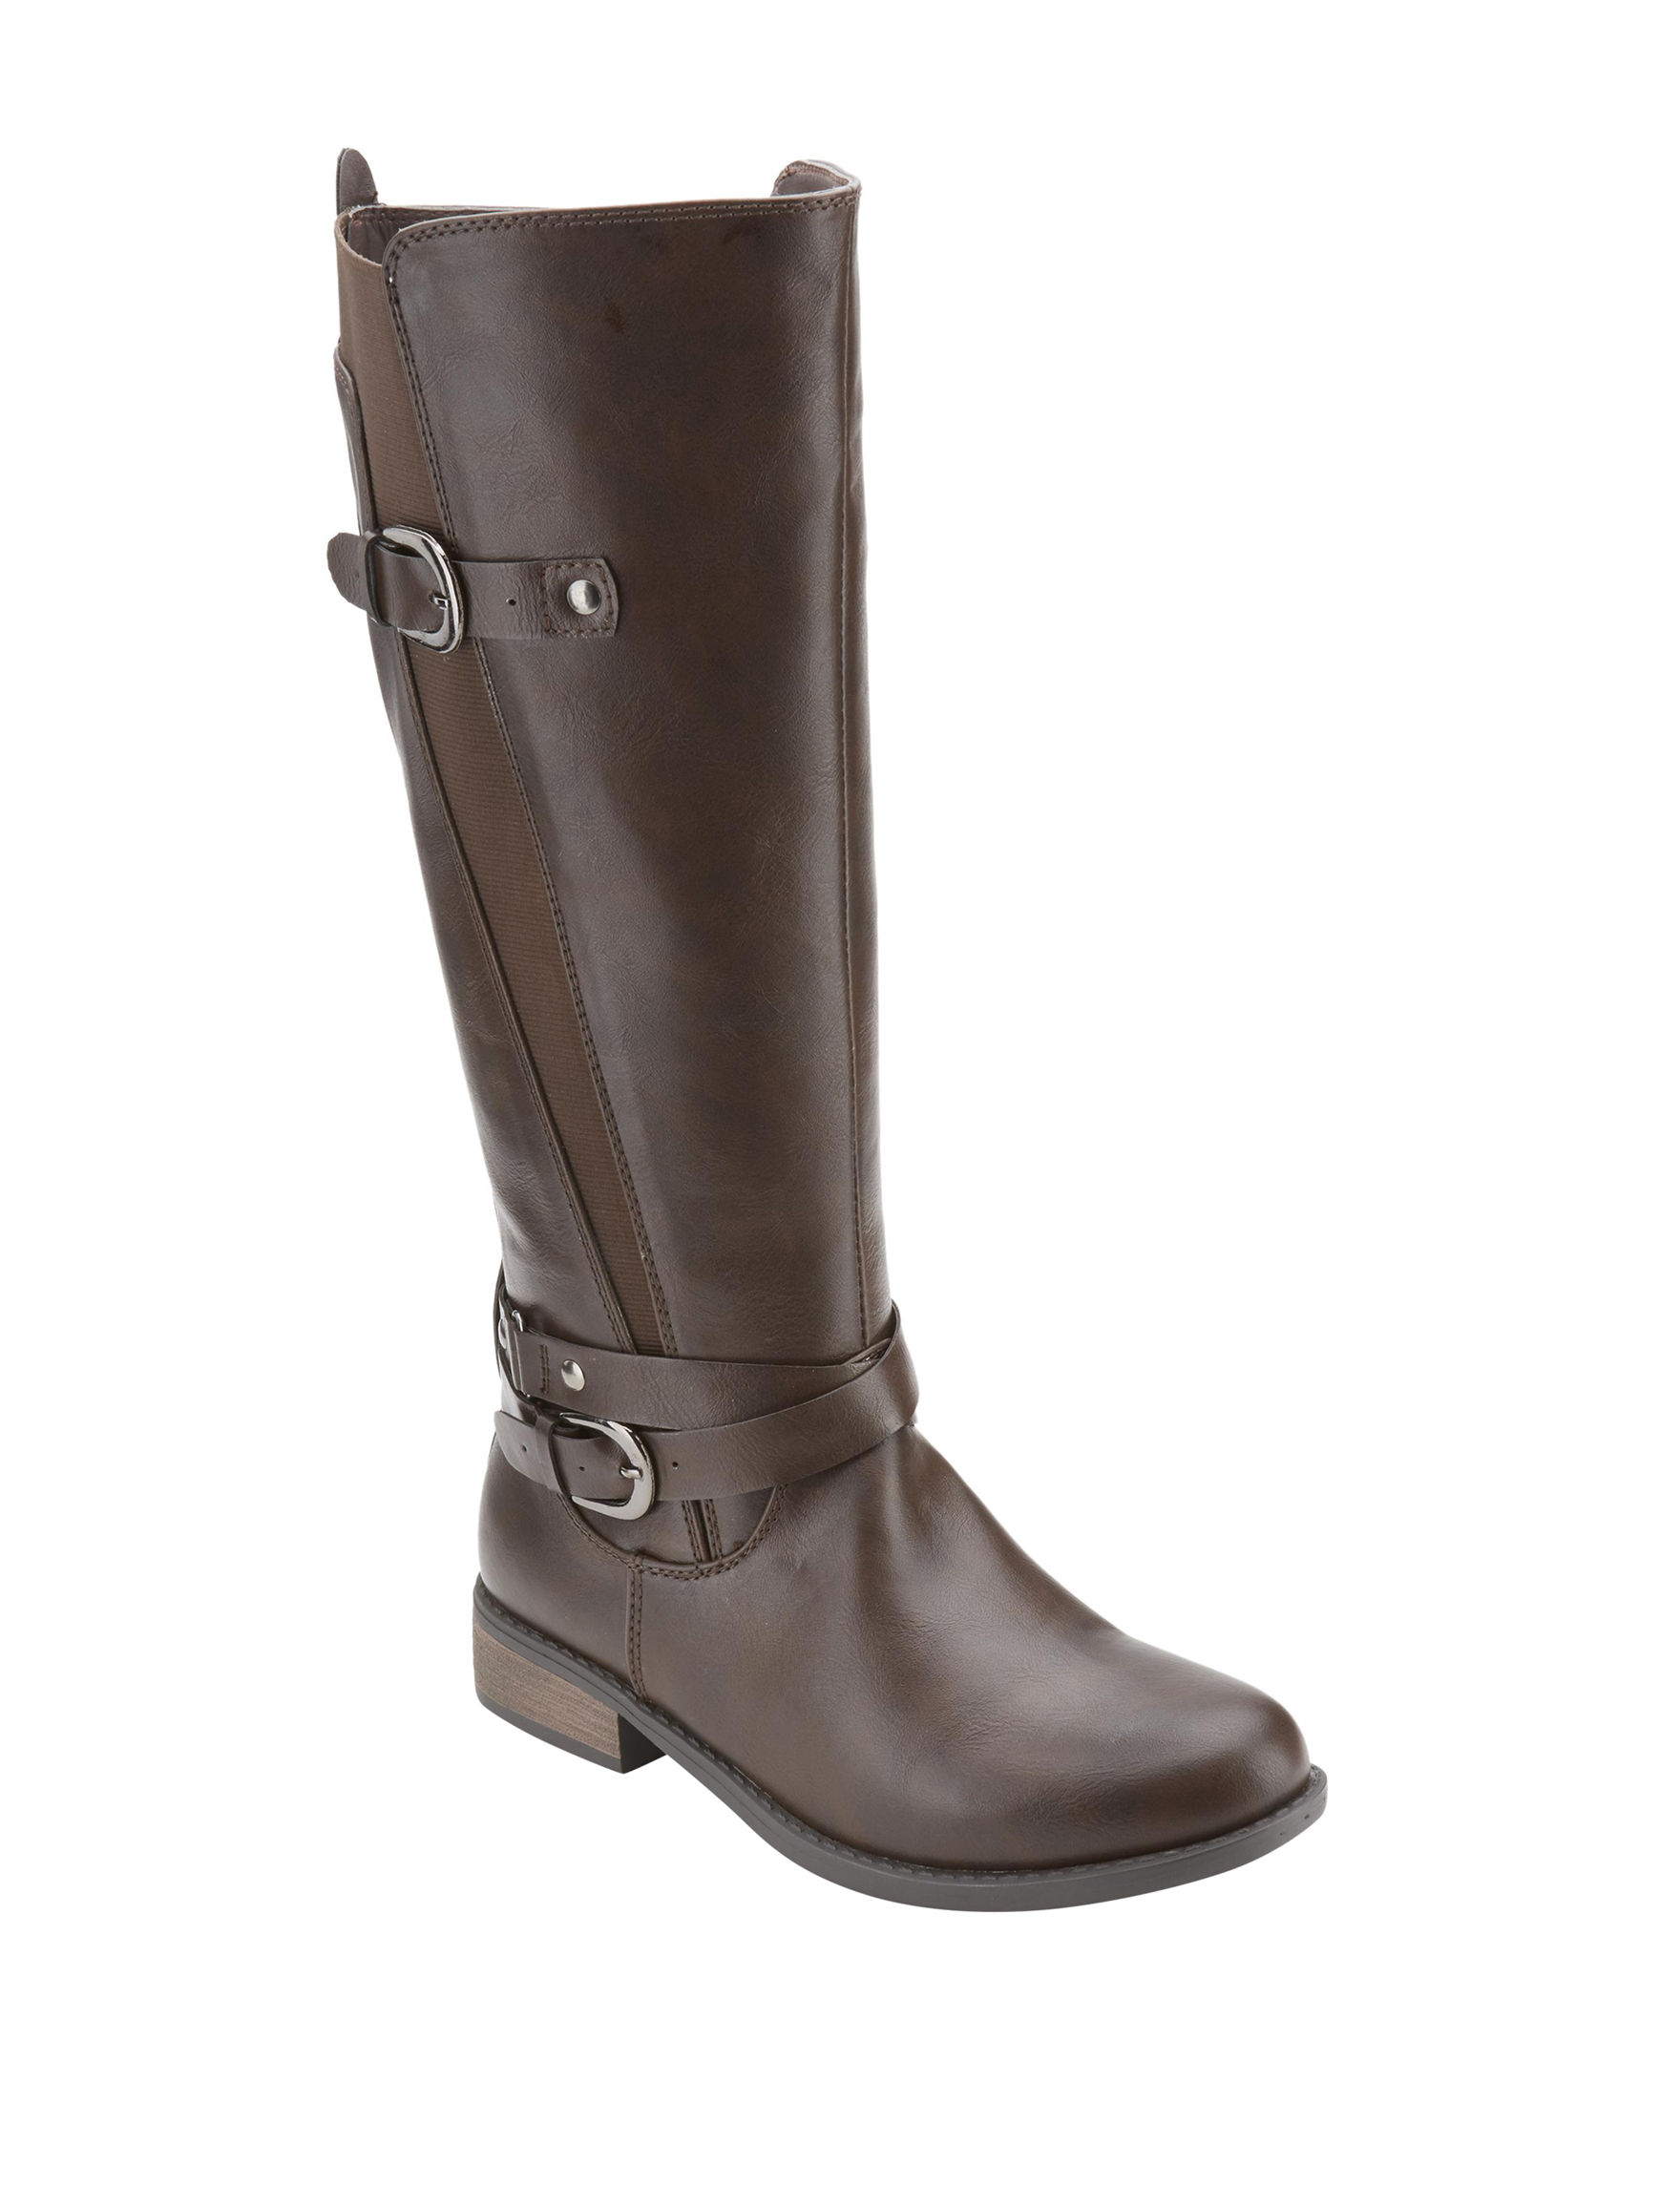 Olivia Miller Dillingham Buckled Riding Boots | Stage Stores